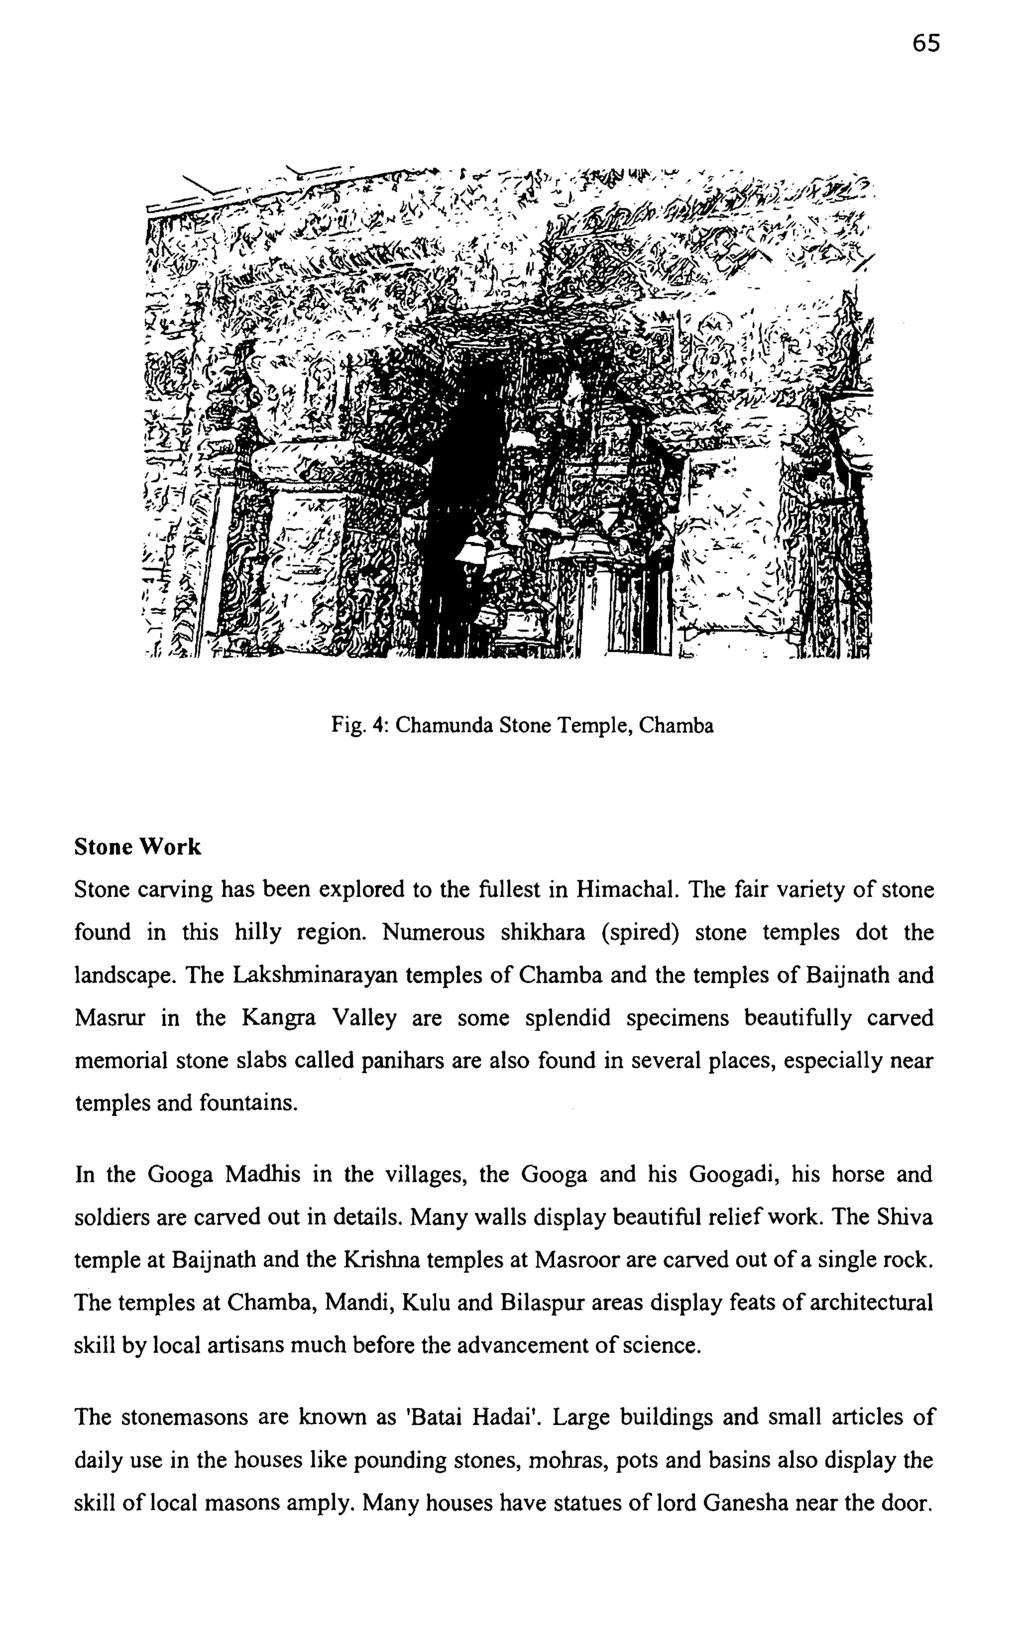 65 Fig. 4: Chamunda Stone Temple, Chamba Stone Work Stone carving has been explored to the fullest in Himachal. The fair variety of stone found in this hilly region.